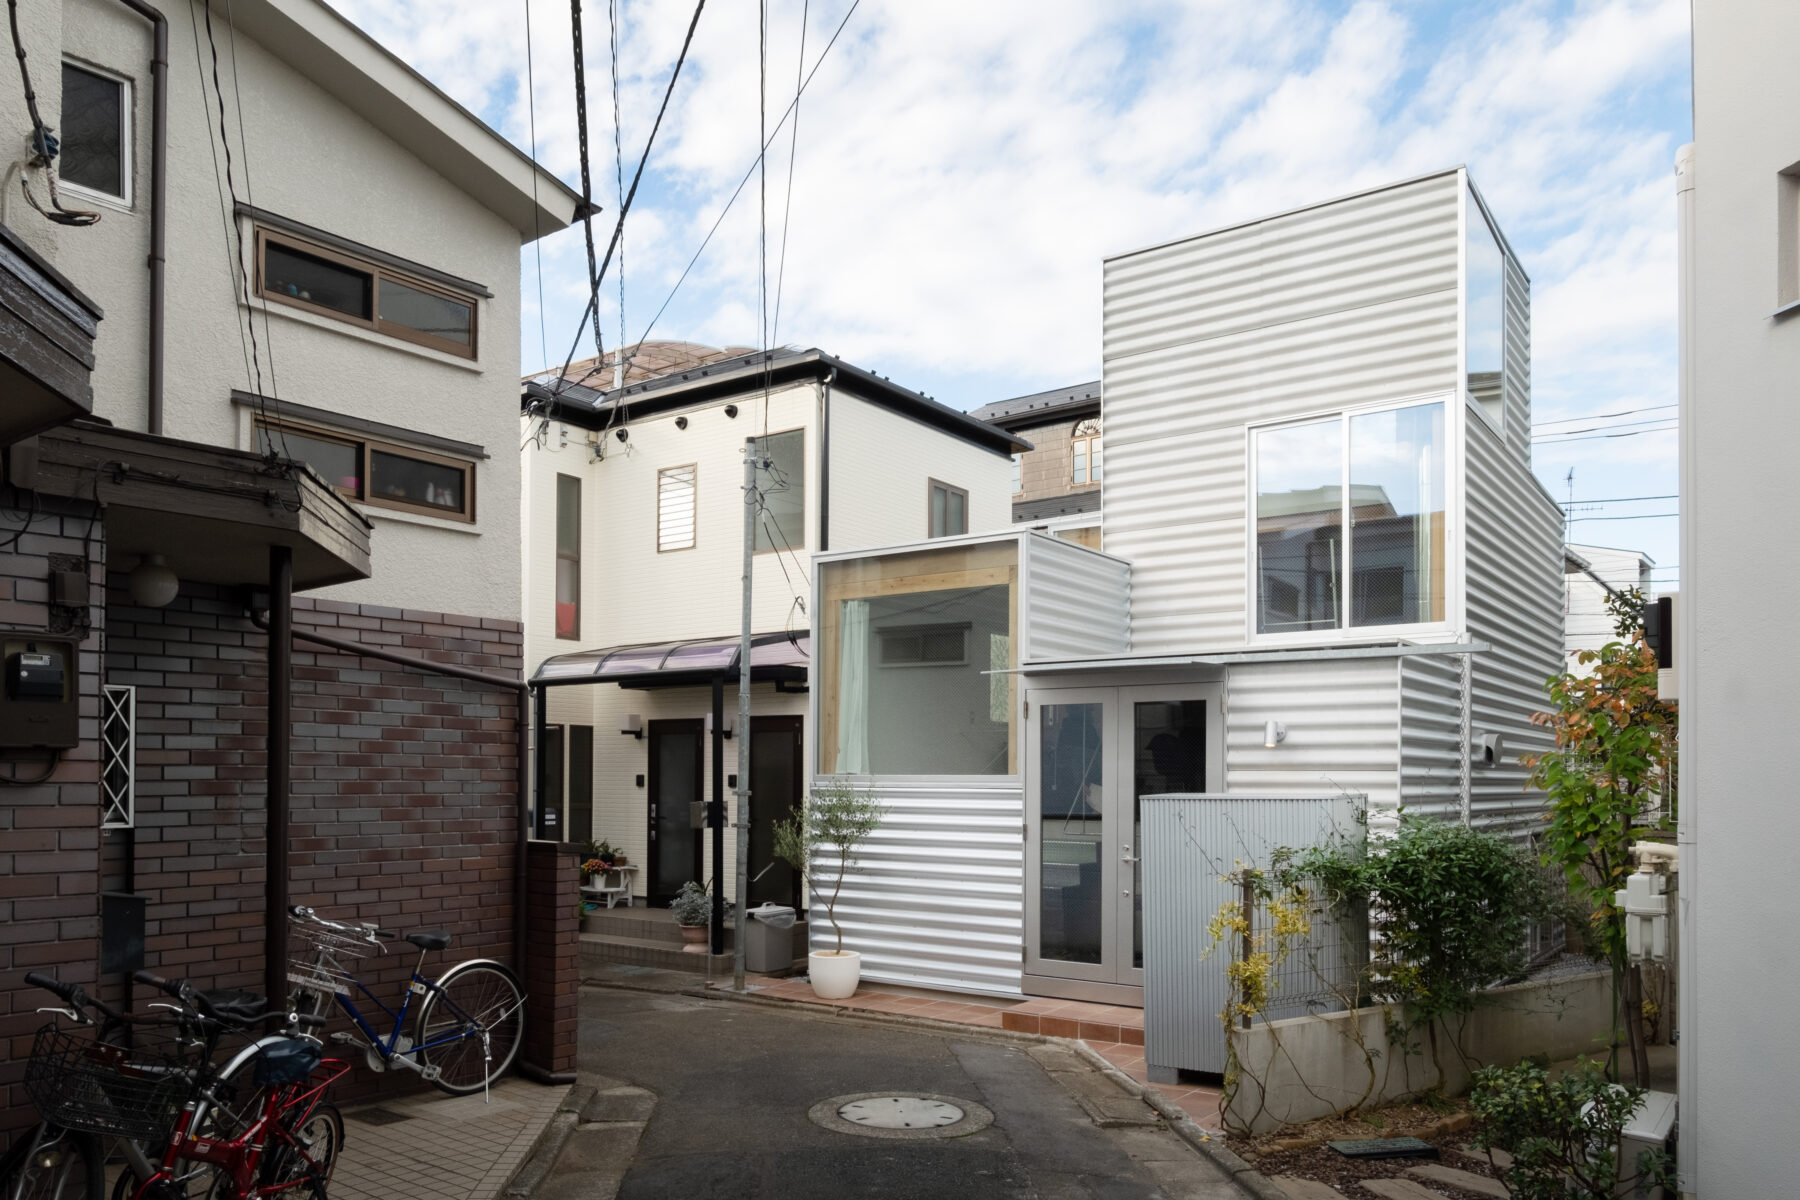 Archisearch UNEMORI ARCHITECTS completes compact House Tokyo with footprint of 26m2